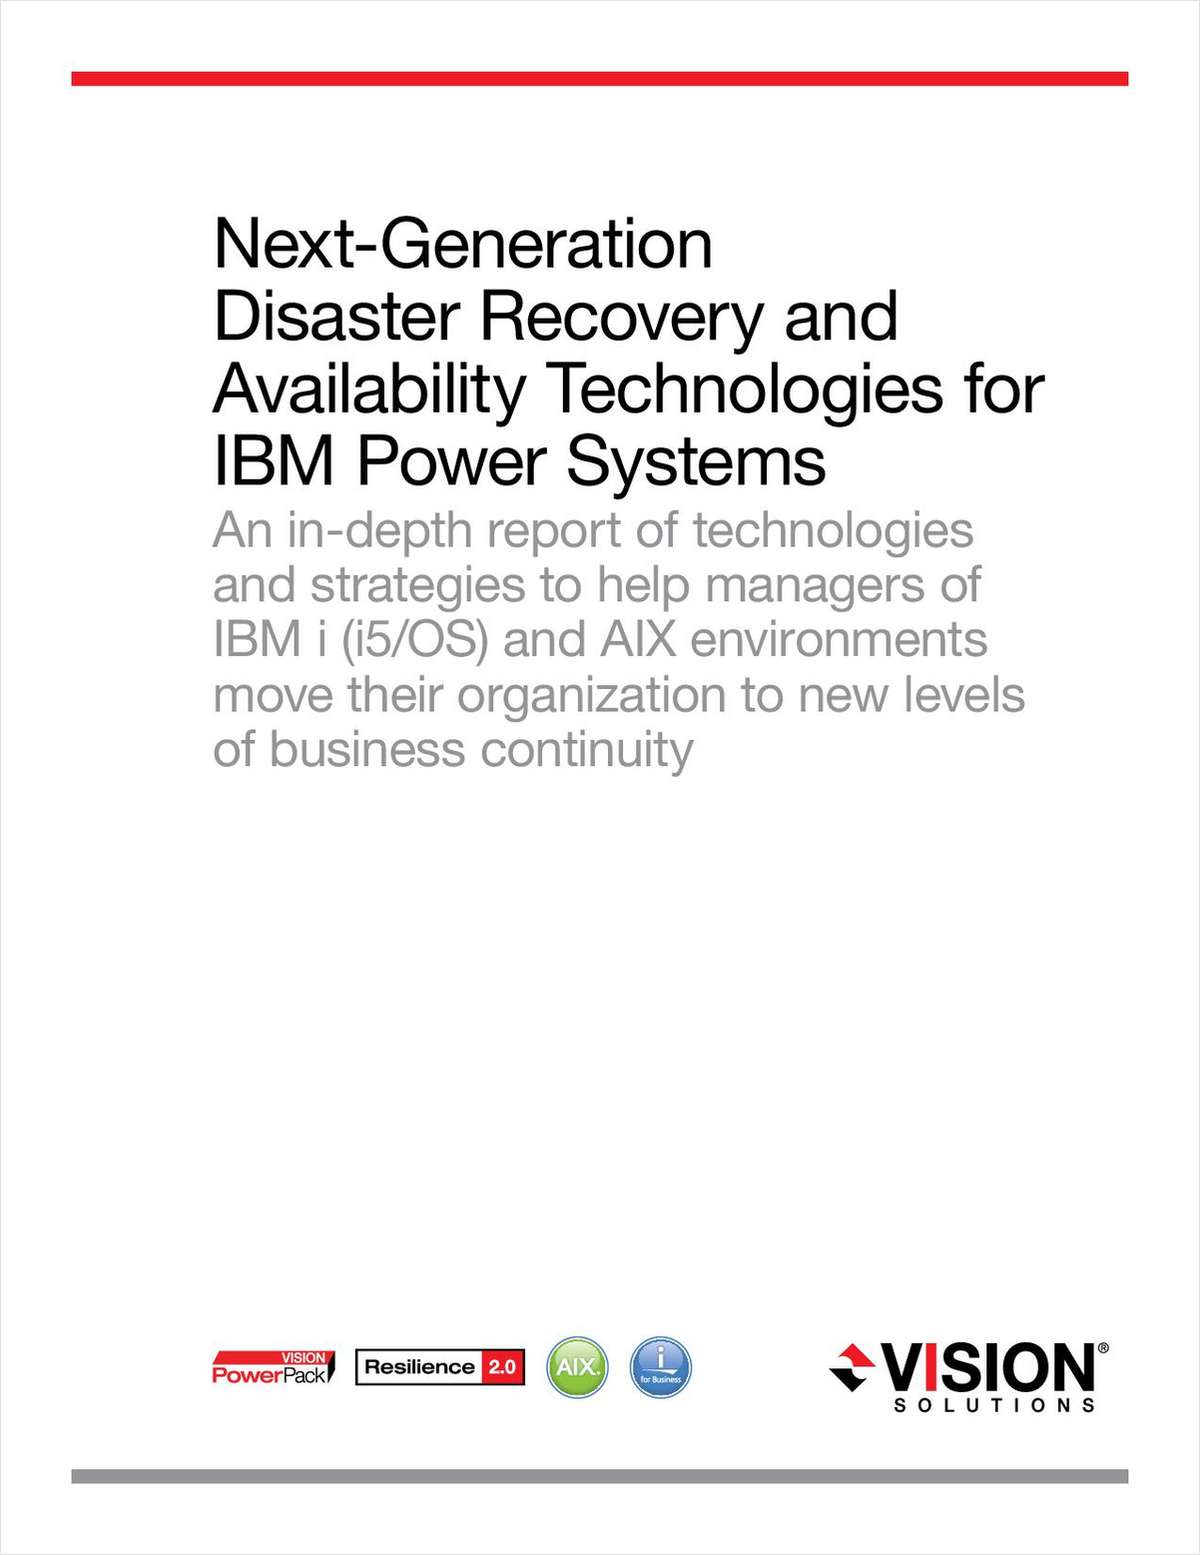 Next-Generation Disaster Recovery and Availability Technologies for AIX and IBM i (i5/OS) on IBM Power Systems